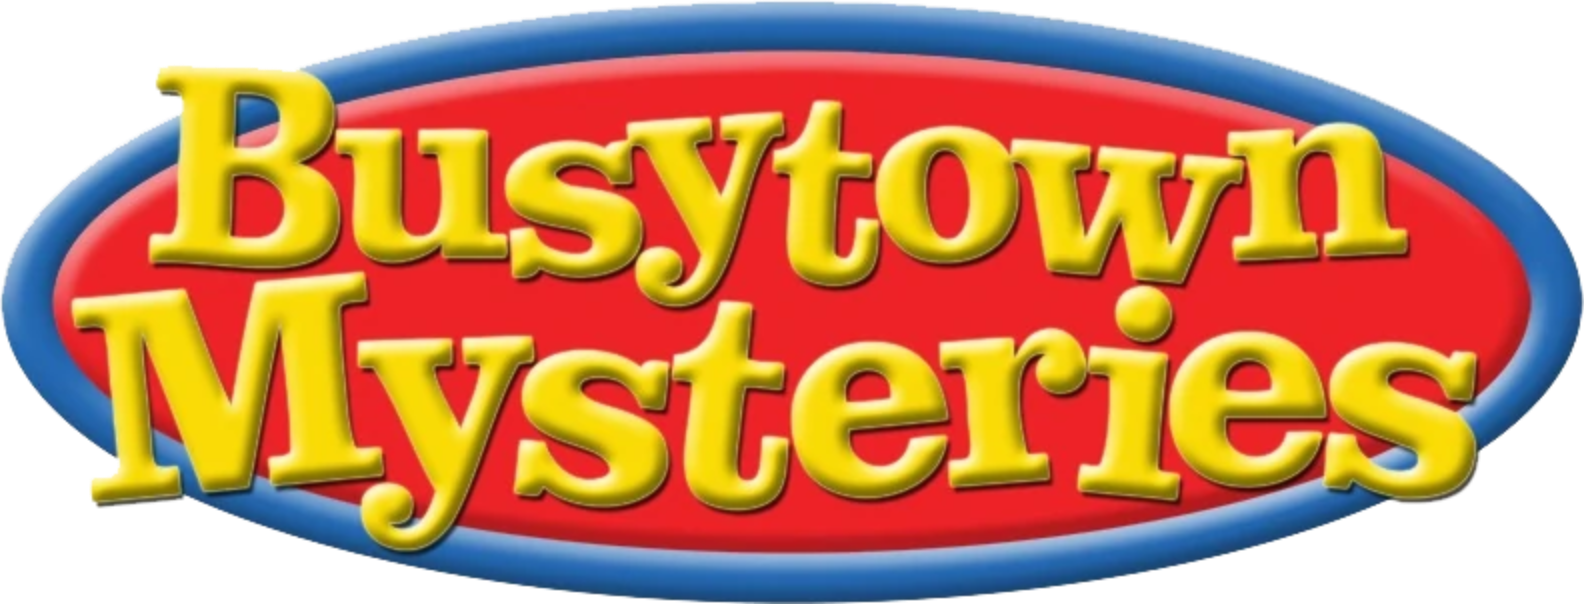 Busytown Mysteries Complete (5 DVDs Box Set)